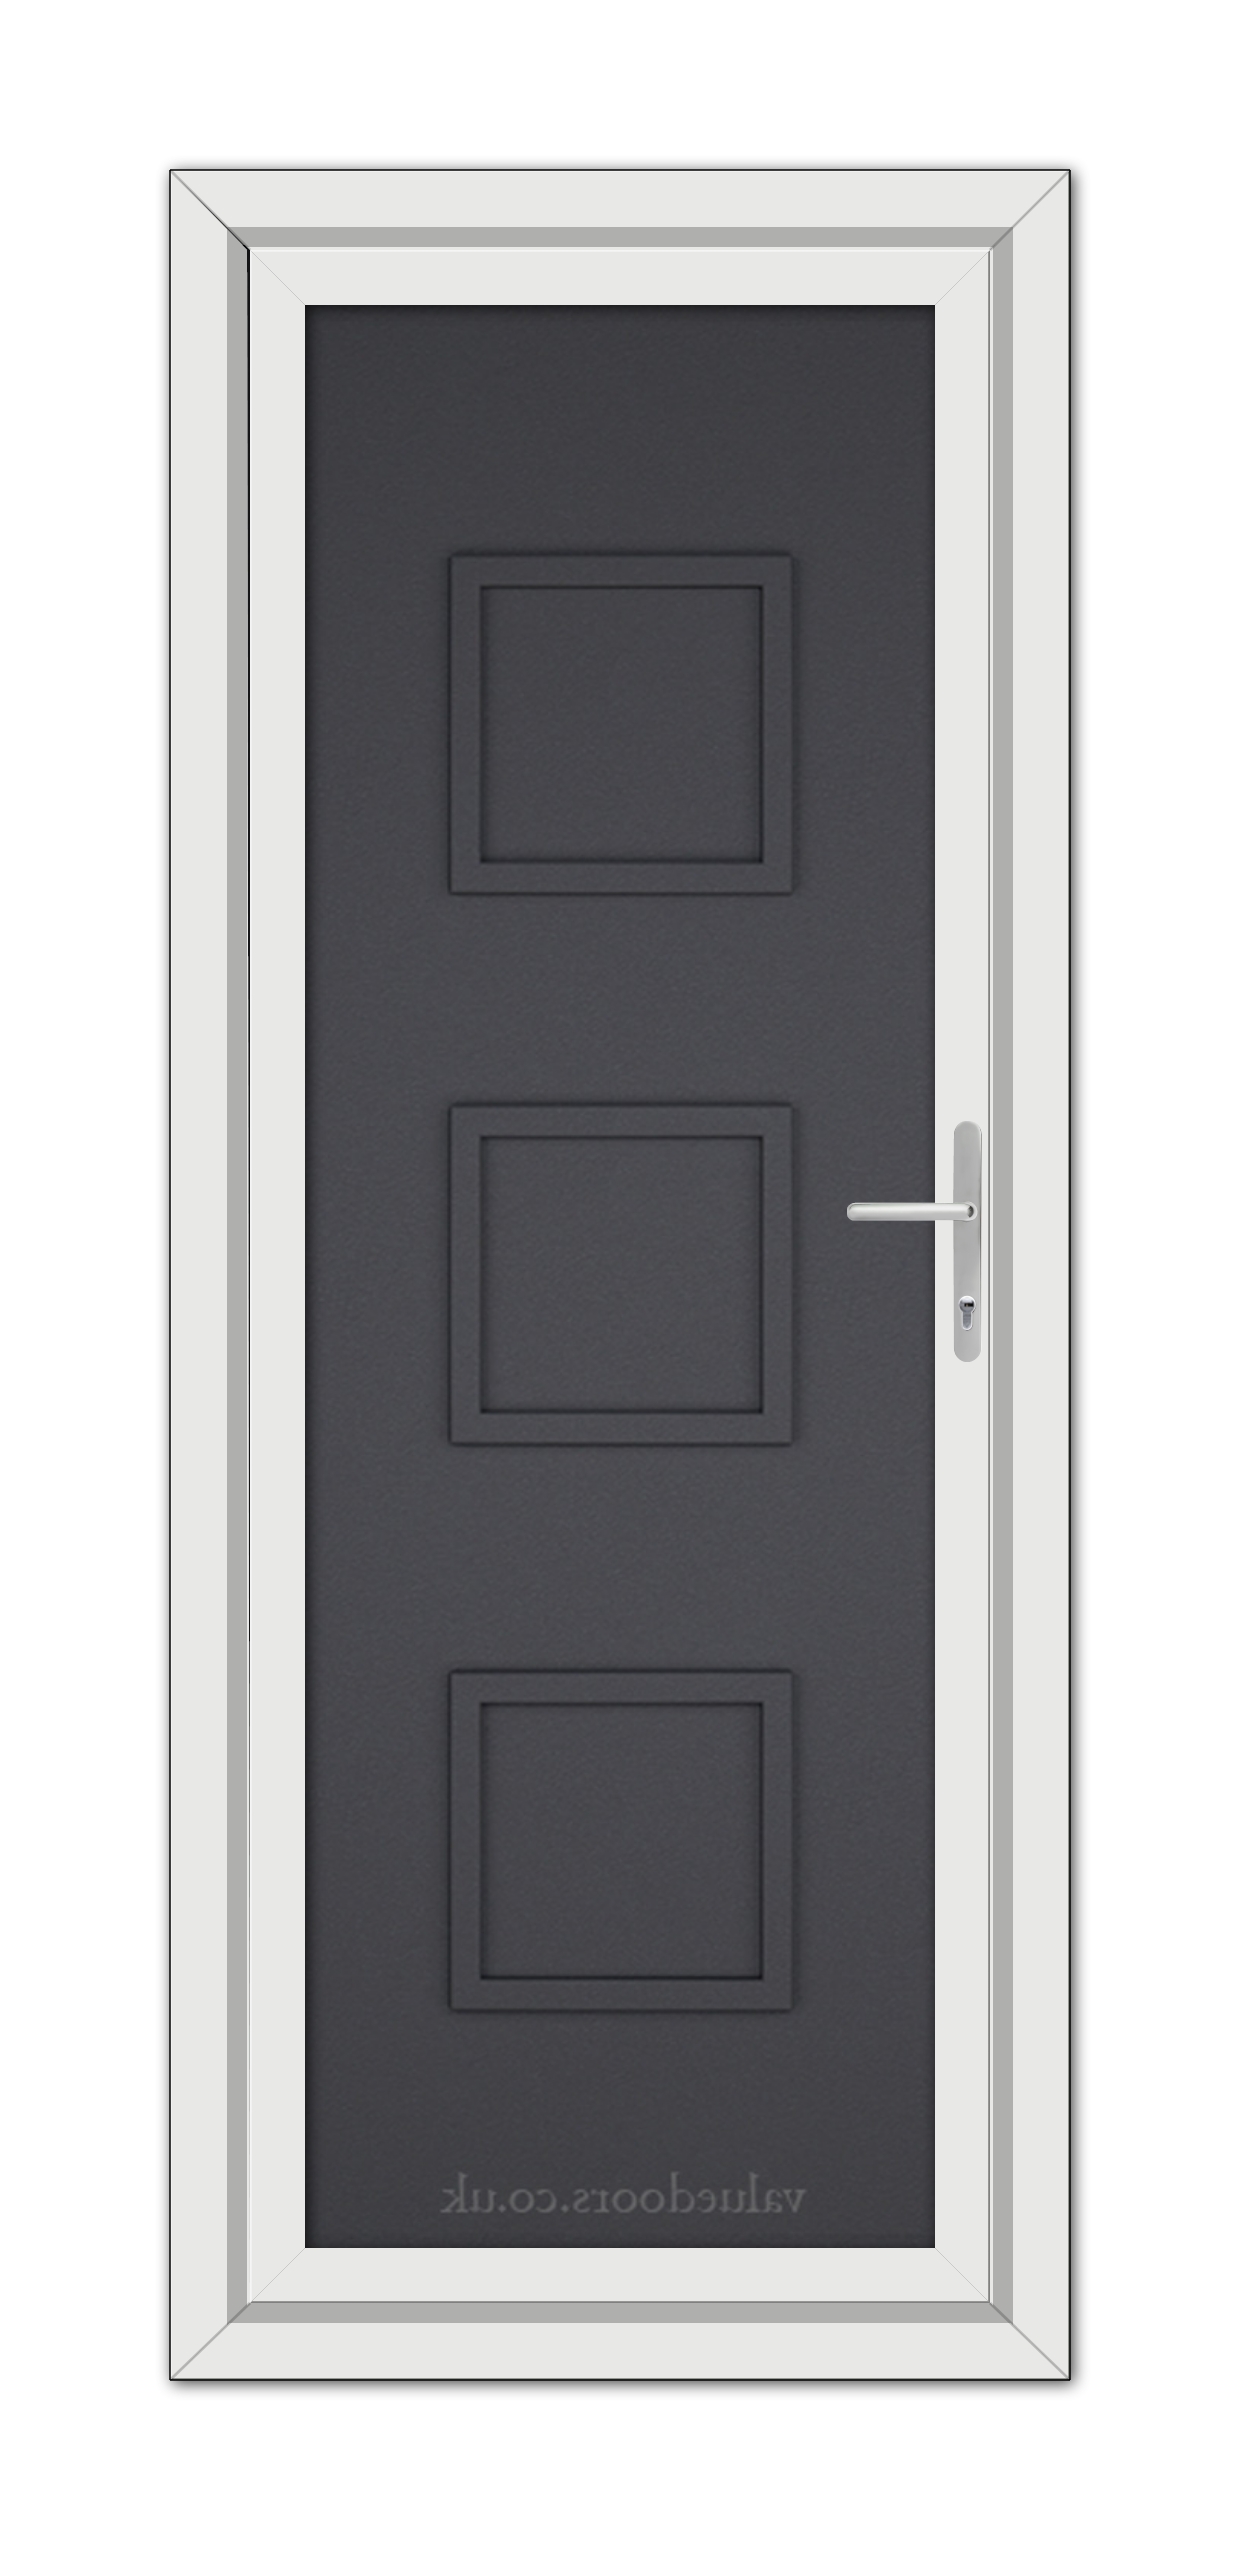 Vertical image of a Grey Grained Modern 5013 Solid uPVC Door with three recessed panels, a silver handle, and a white frame, viewed from the front.